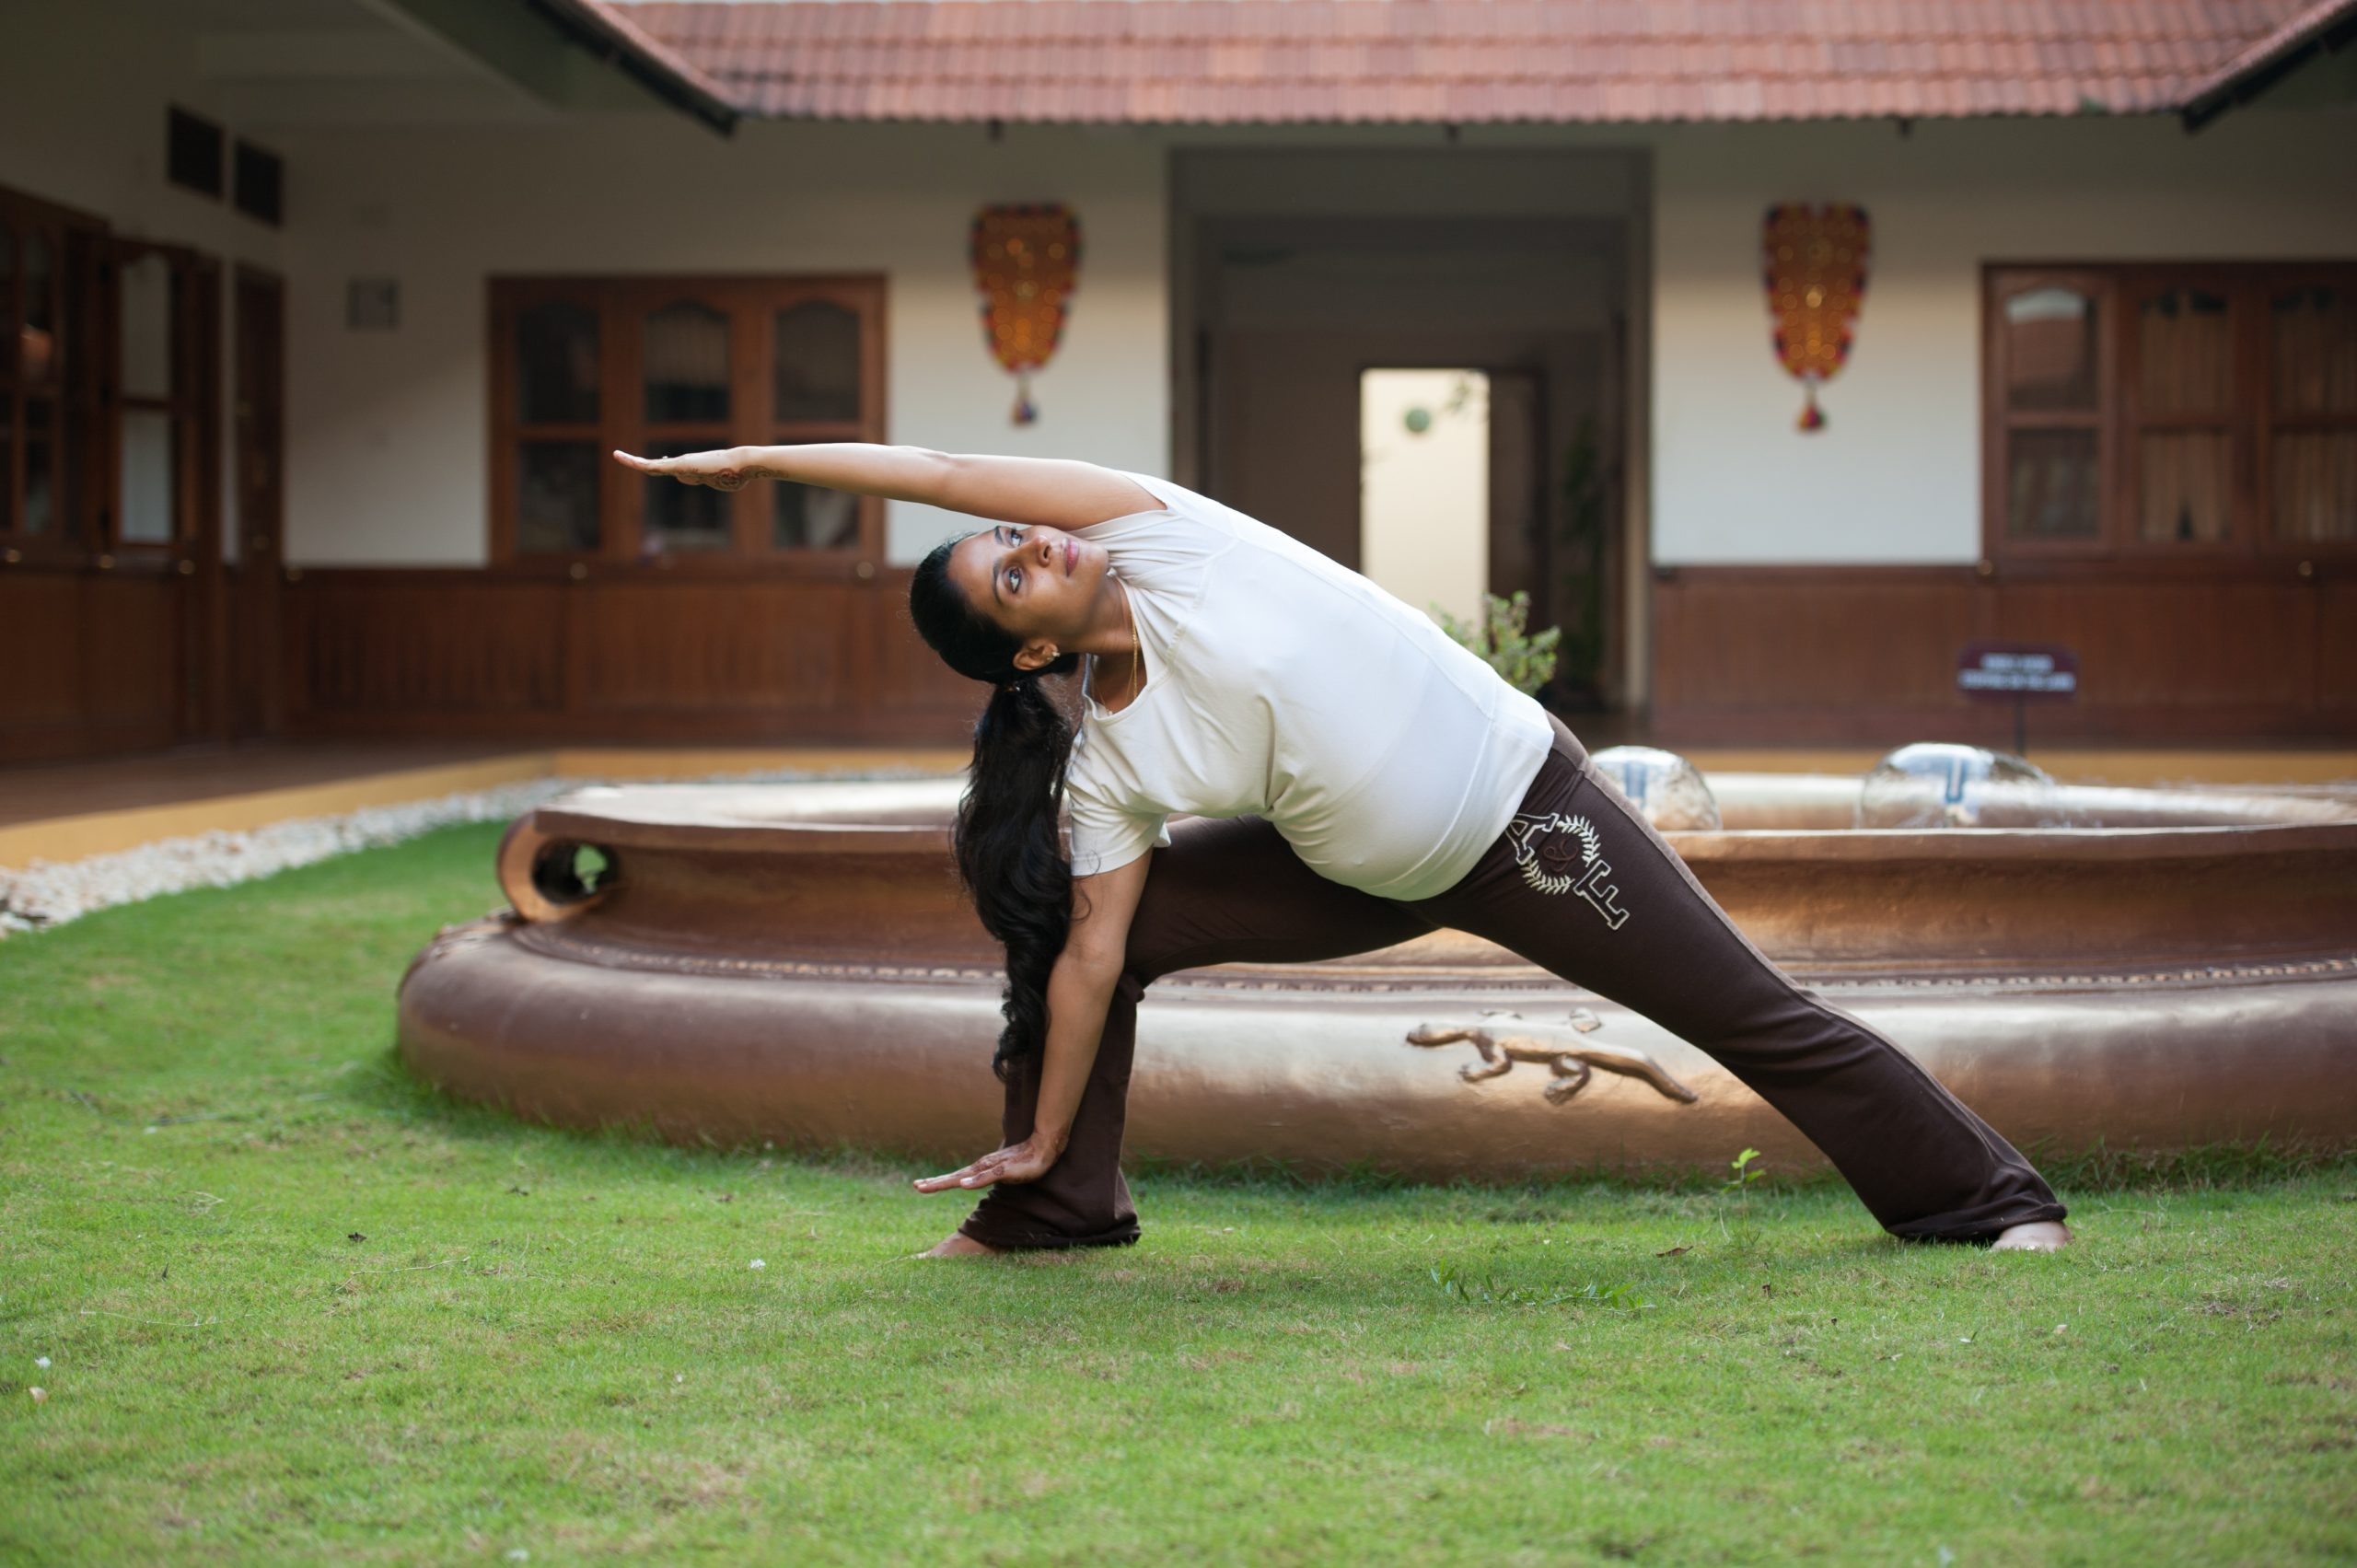 Safe Yoga Poses for Each Trimester of Pregnancy: Best Prenatal Yoga Online  Classes in India